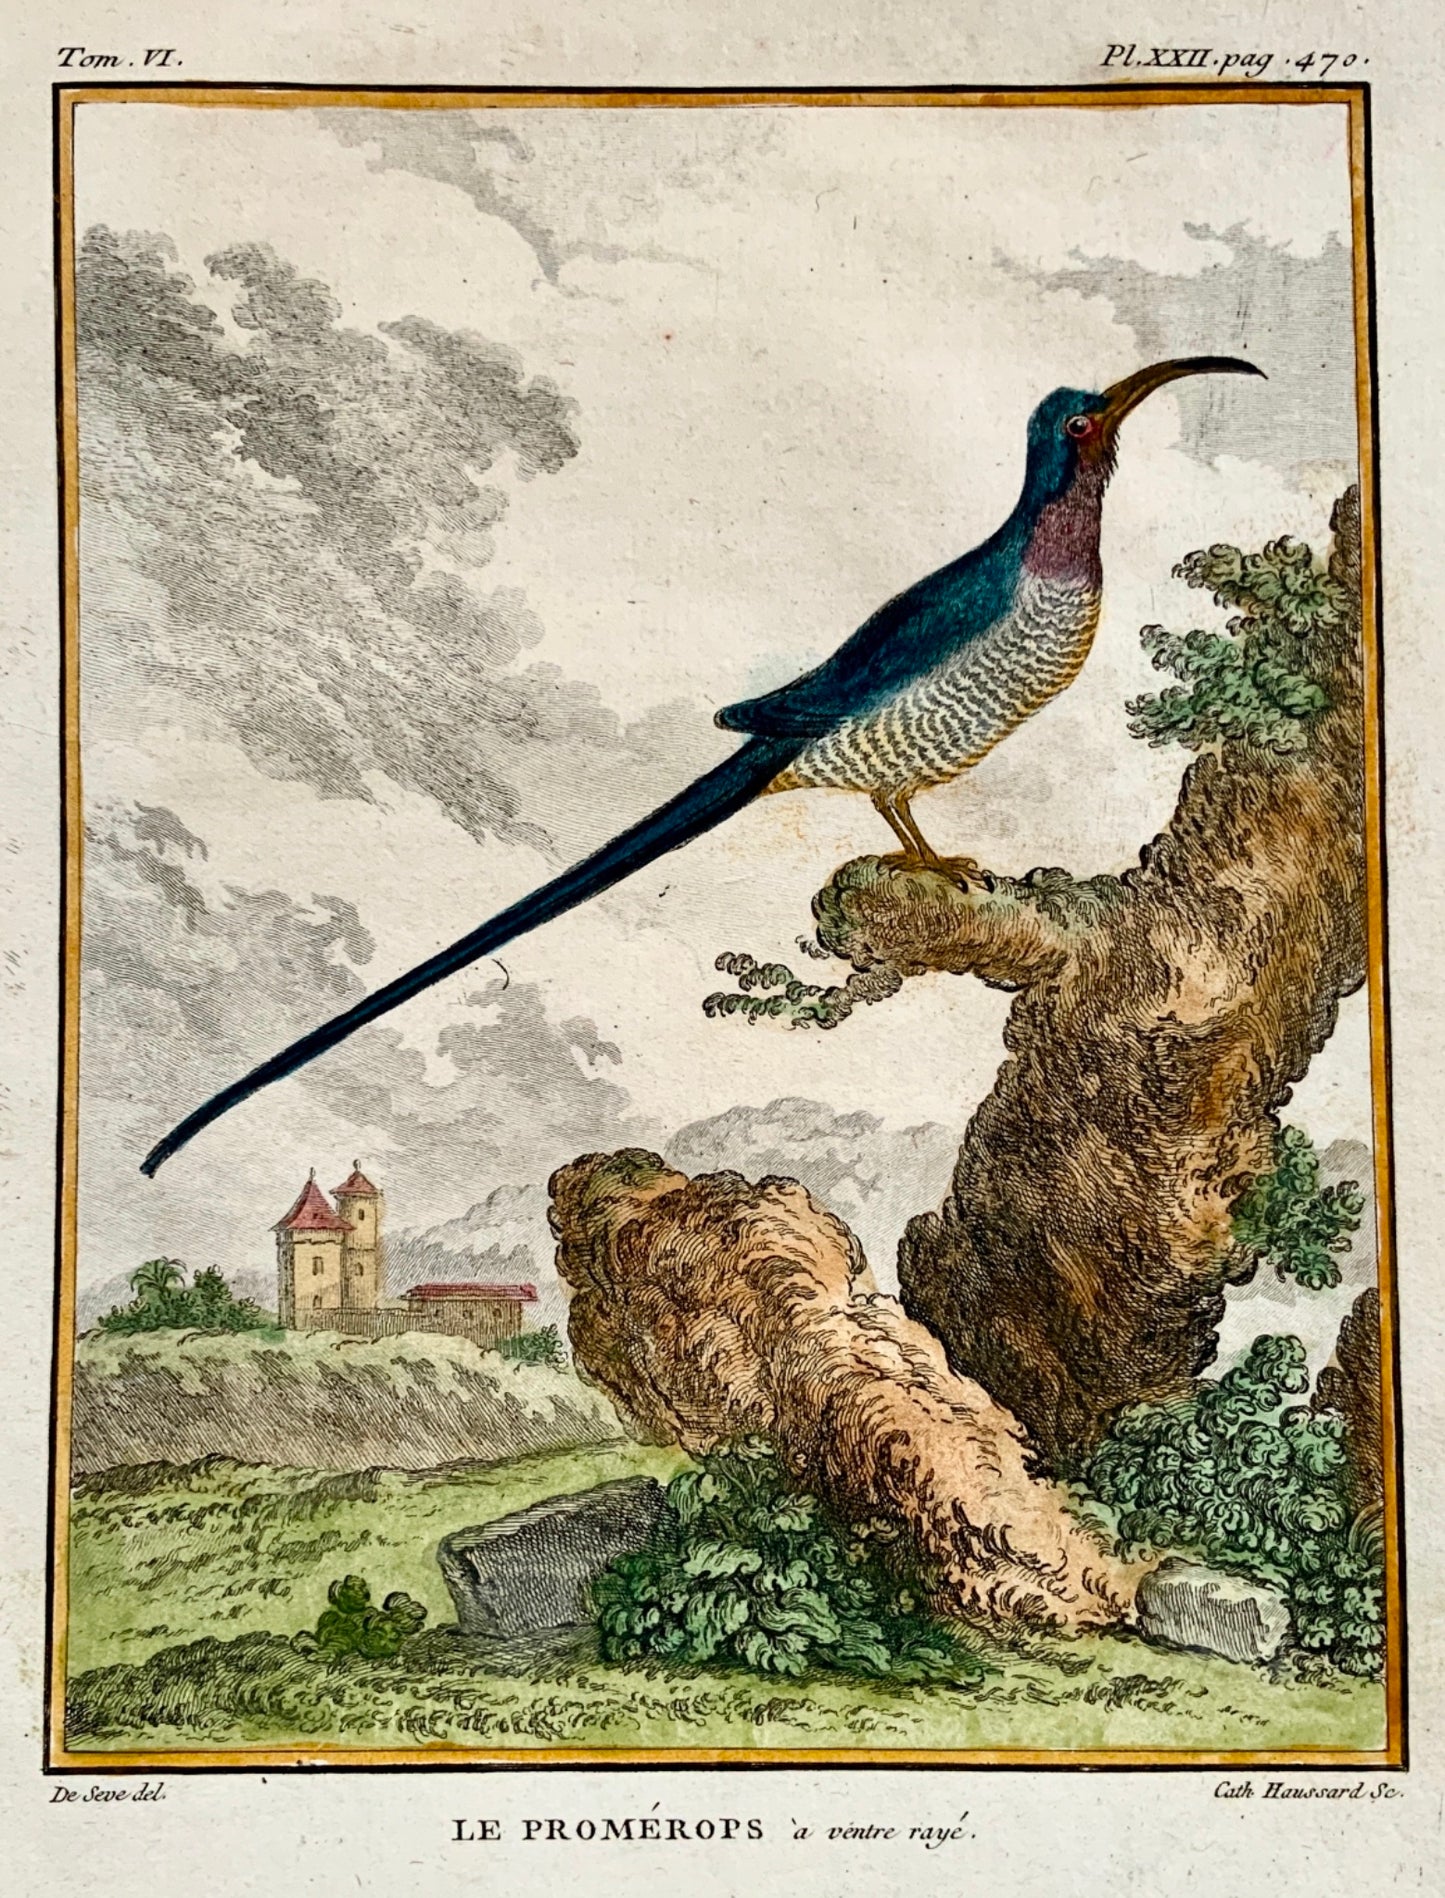 1779 Haussard after Jacques de Seve - Sugarbird - 4to engraving